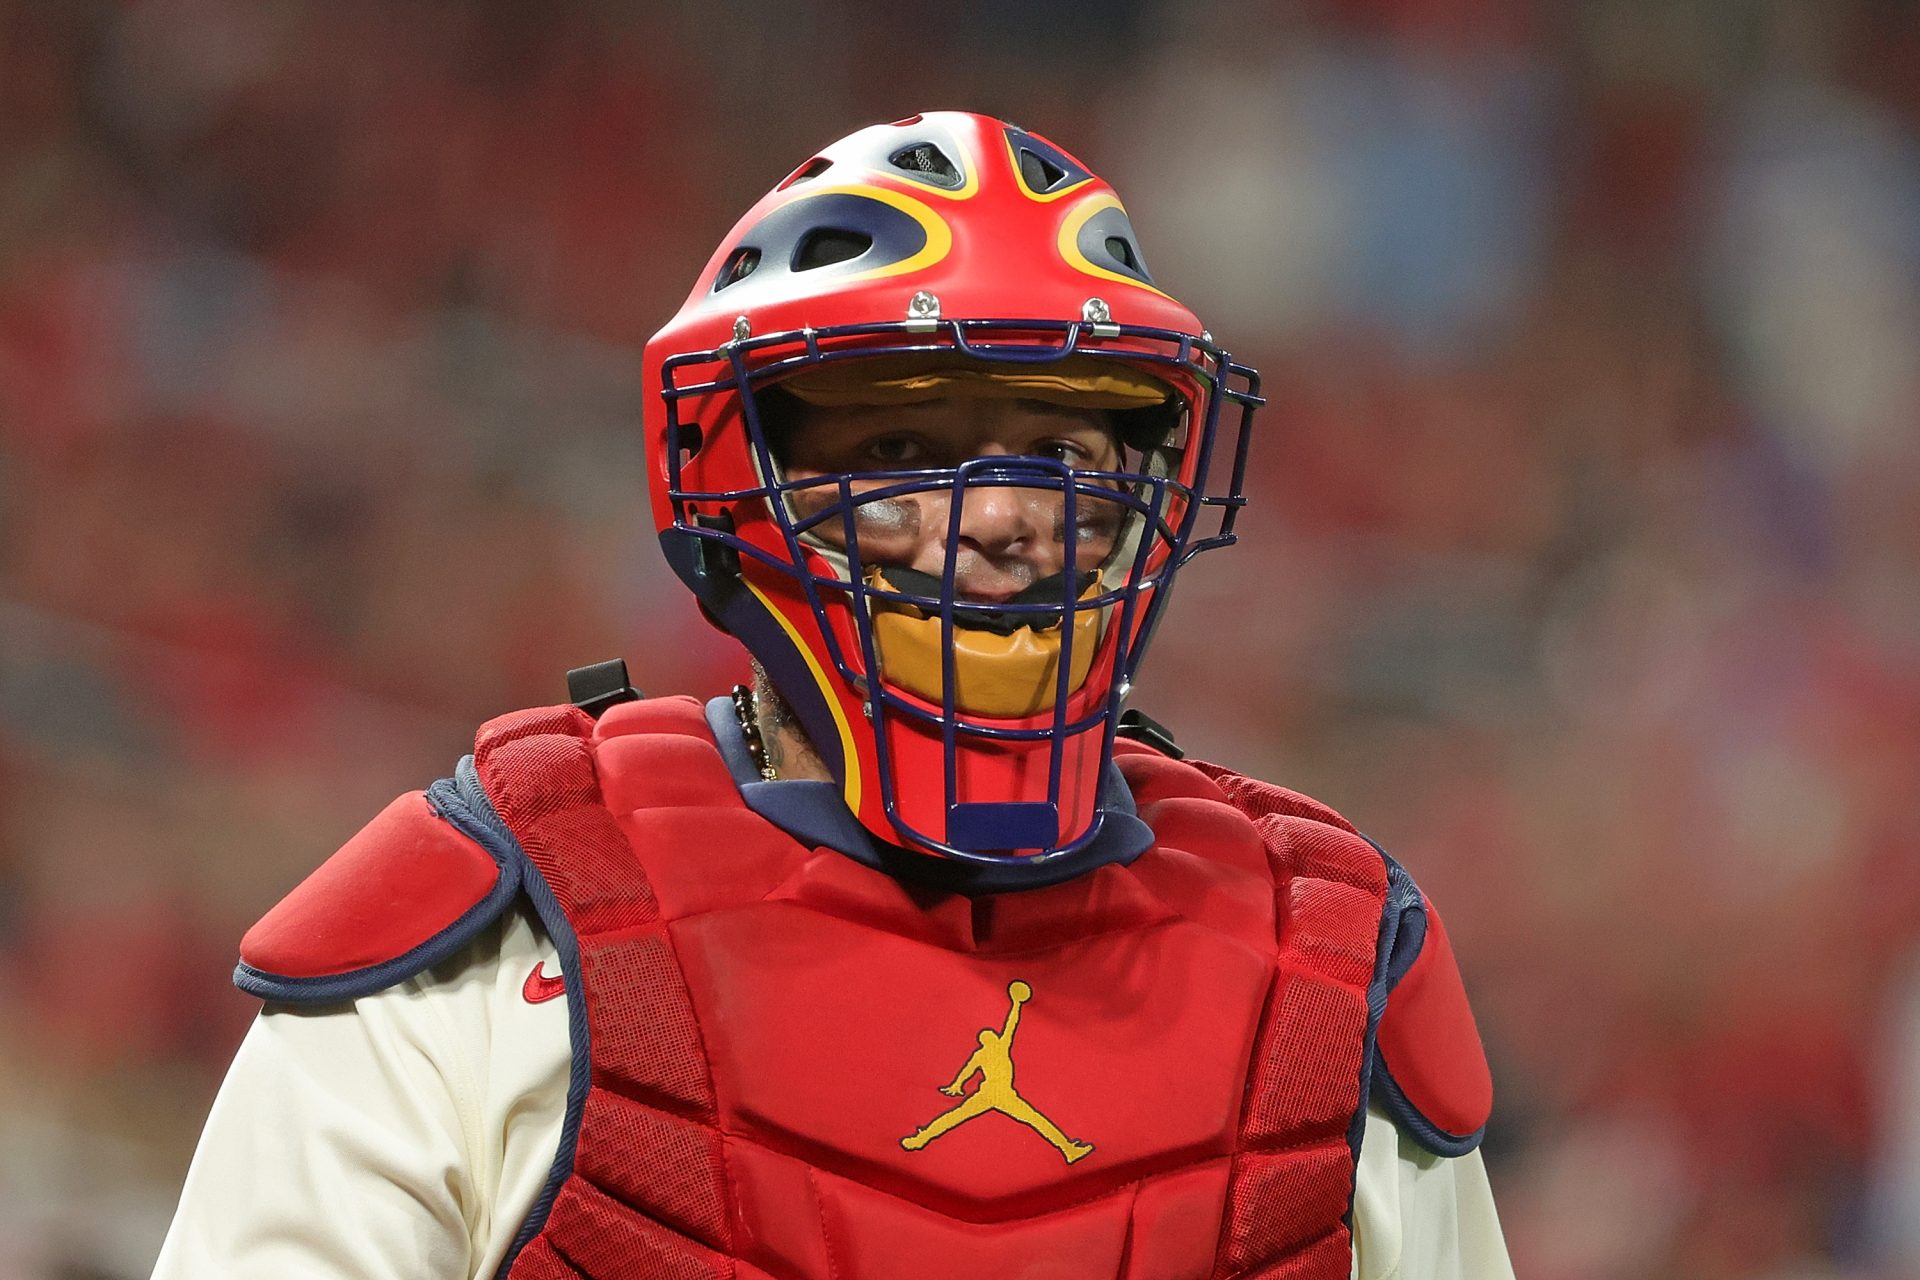 Bengie, Jose and Yadier Molina (pictured)